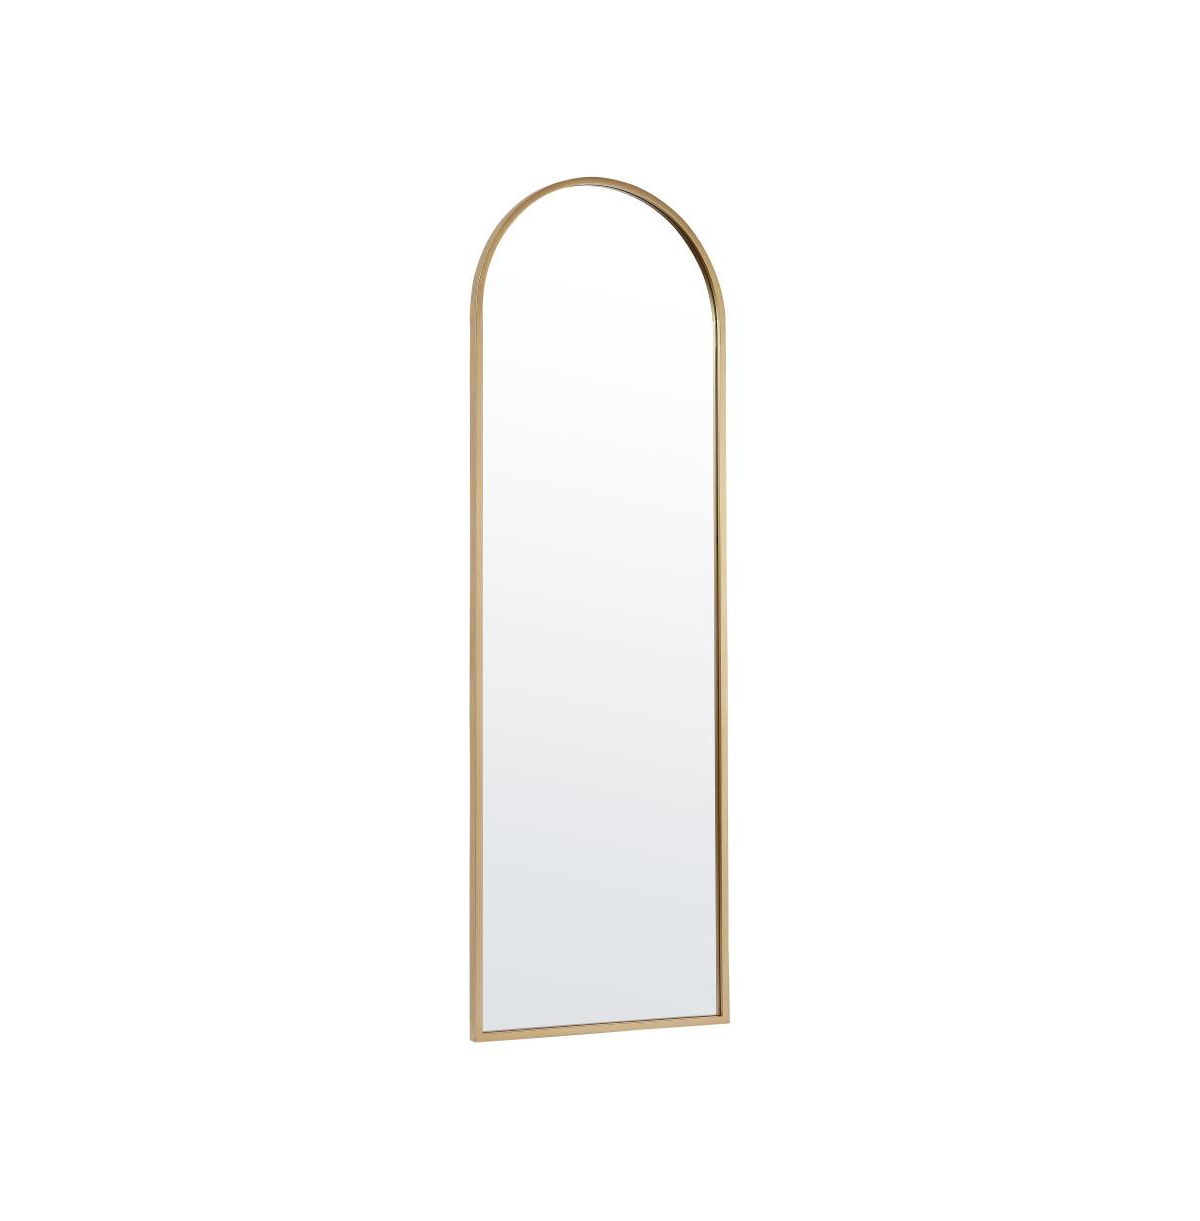 Arched Wall Mirror, Metal Framed Wall Mirror For Hallways, Entryways, Dining And Living Rooms - Gold